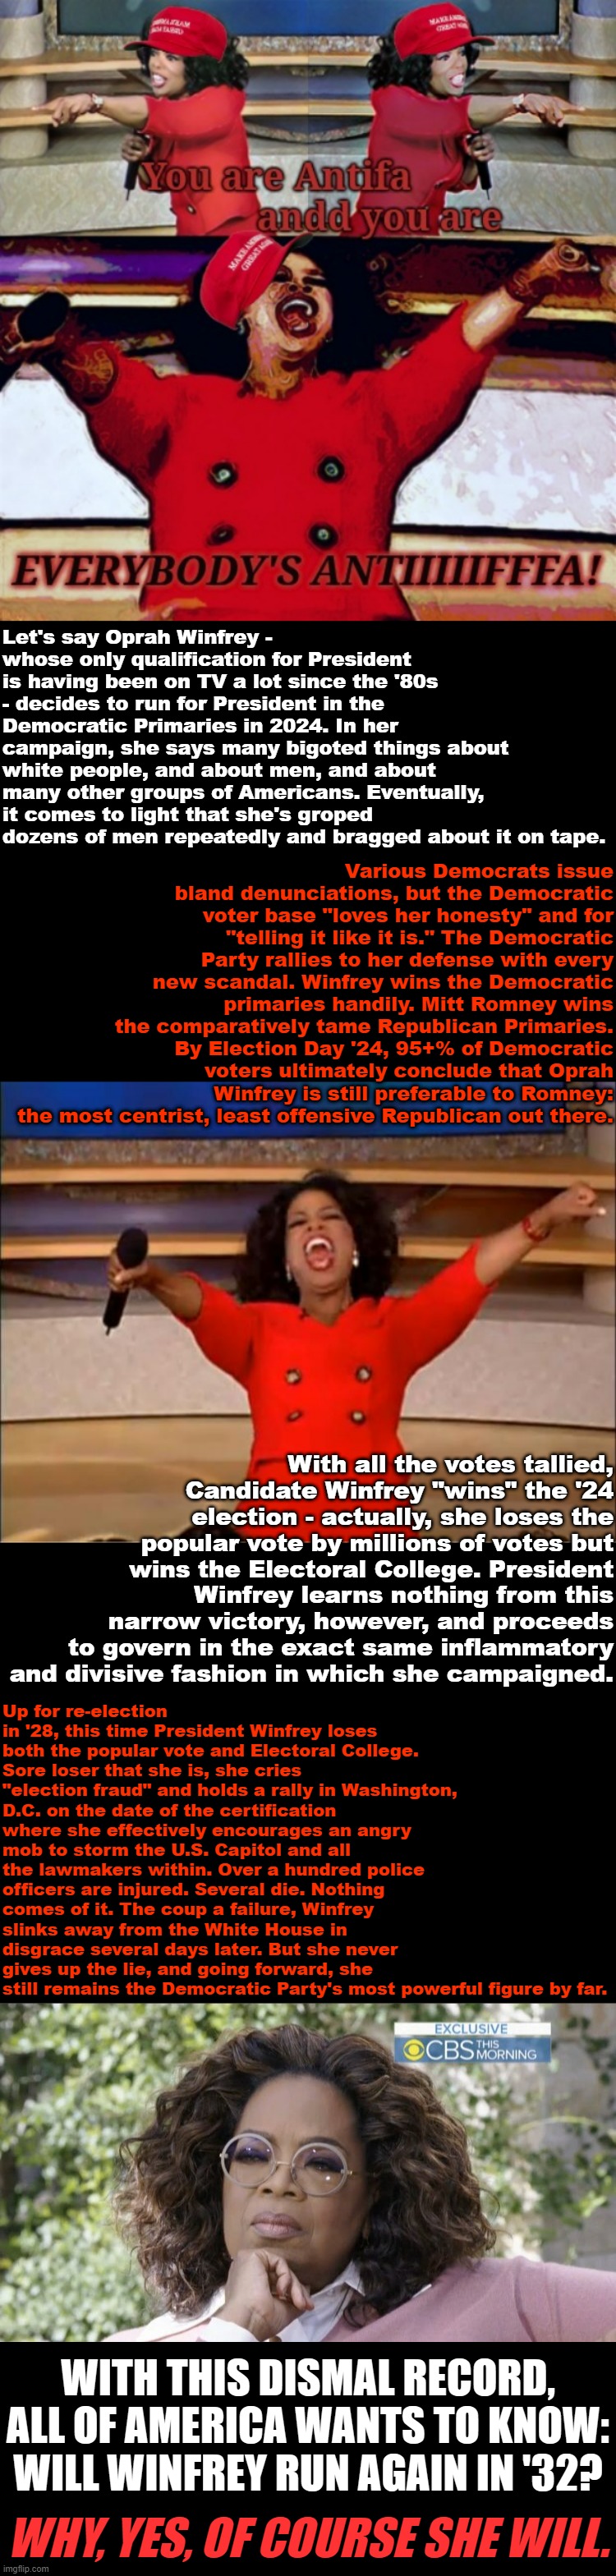 How Oprah Winfrey took over the Democratic Party: A political fantasia. | Let's say Oprah Winfrey - whose only qualification for President is having been on TV a lot since the '80s - decides to run for President in the Democratic Primaries in 2024. In her campaign, she says many bigoted things about white people, and about men, and about many other groups of Americans. Eventually, it comes to light that she's groped dozens of men repeatedly and bragged about it on tape. Various Democrats issue bland denunciations, but the Democratic voter base "loves her honesty" and for "telling it like it is." The Democratic Party rallies to her defense with every new scandal. Winfrey wins the Democratic primaries handily. Mitt Romney wins the comparatively tame Republican Primaries. By Election Day '24, 95+% of Democratic voters ultimately conclude that Oprah Winfrey is still preferable to Romney: the most centrist, least offensive Republican out there. With all the votes tallied, Candidate Winfrey "wins" the '24 election - actually, she loses the popular vote by millions of votes but wins the Electoral College. President Winfrey learns nothing from this narrow victory, however, and proceeds to govern in the exact same inflammatory and divisive fashion in which she campaigned. Up for re-election in '28, this time President Winfrey loses both the popular vote and Electoral College. Sore loser that she is, she cries "election fraud" and holds a rally in Washington, D.C. on the date of the certification where she effectively encourages an angry mob to storm the U.S. Capitol and all the lawmakers within. Over a hundred police officers are injured. Several die. Nothing comes of it. The coup a failure, Winfrey slinks away from the White House in disgrace several days later. But she never gives up the lie, and going forward, she still remains the Democratic Party's most powerful figure by far. WITH THIS DISMAL RECORD, ALL OF AMERICA WANTS TO KNOW: WILL WINFREY RUN AGAIN IN '32? WHY, YES, OF COURSE SHE WILL. | image tagged in maga oprah winfrey everybody's antifa,memes,oprah you get a,thinking oprah winfrey | made w/ Imgflip meme maker